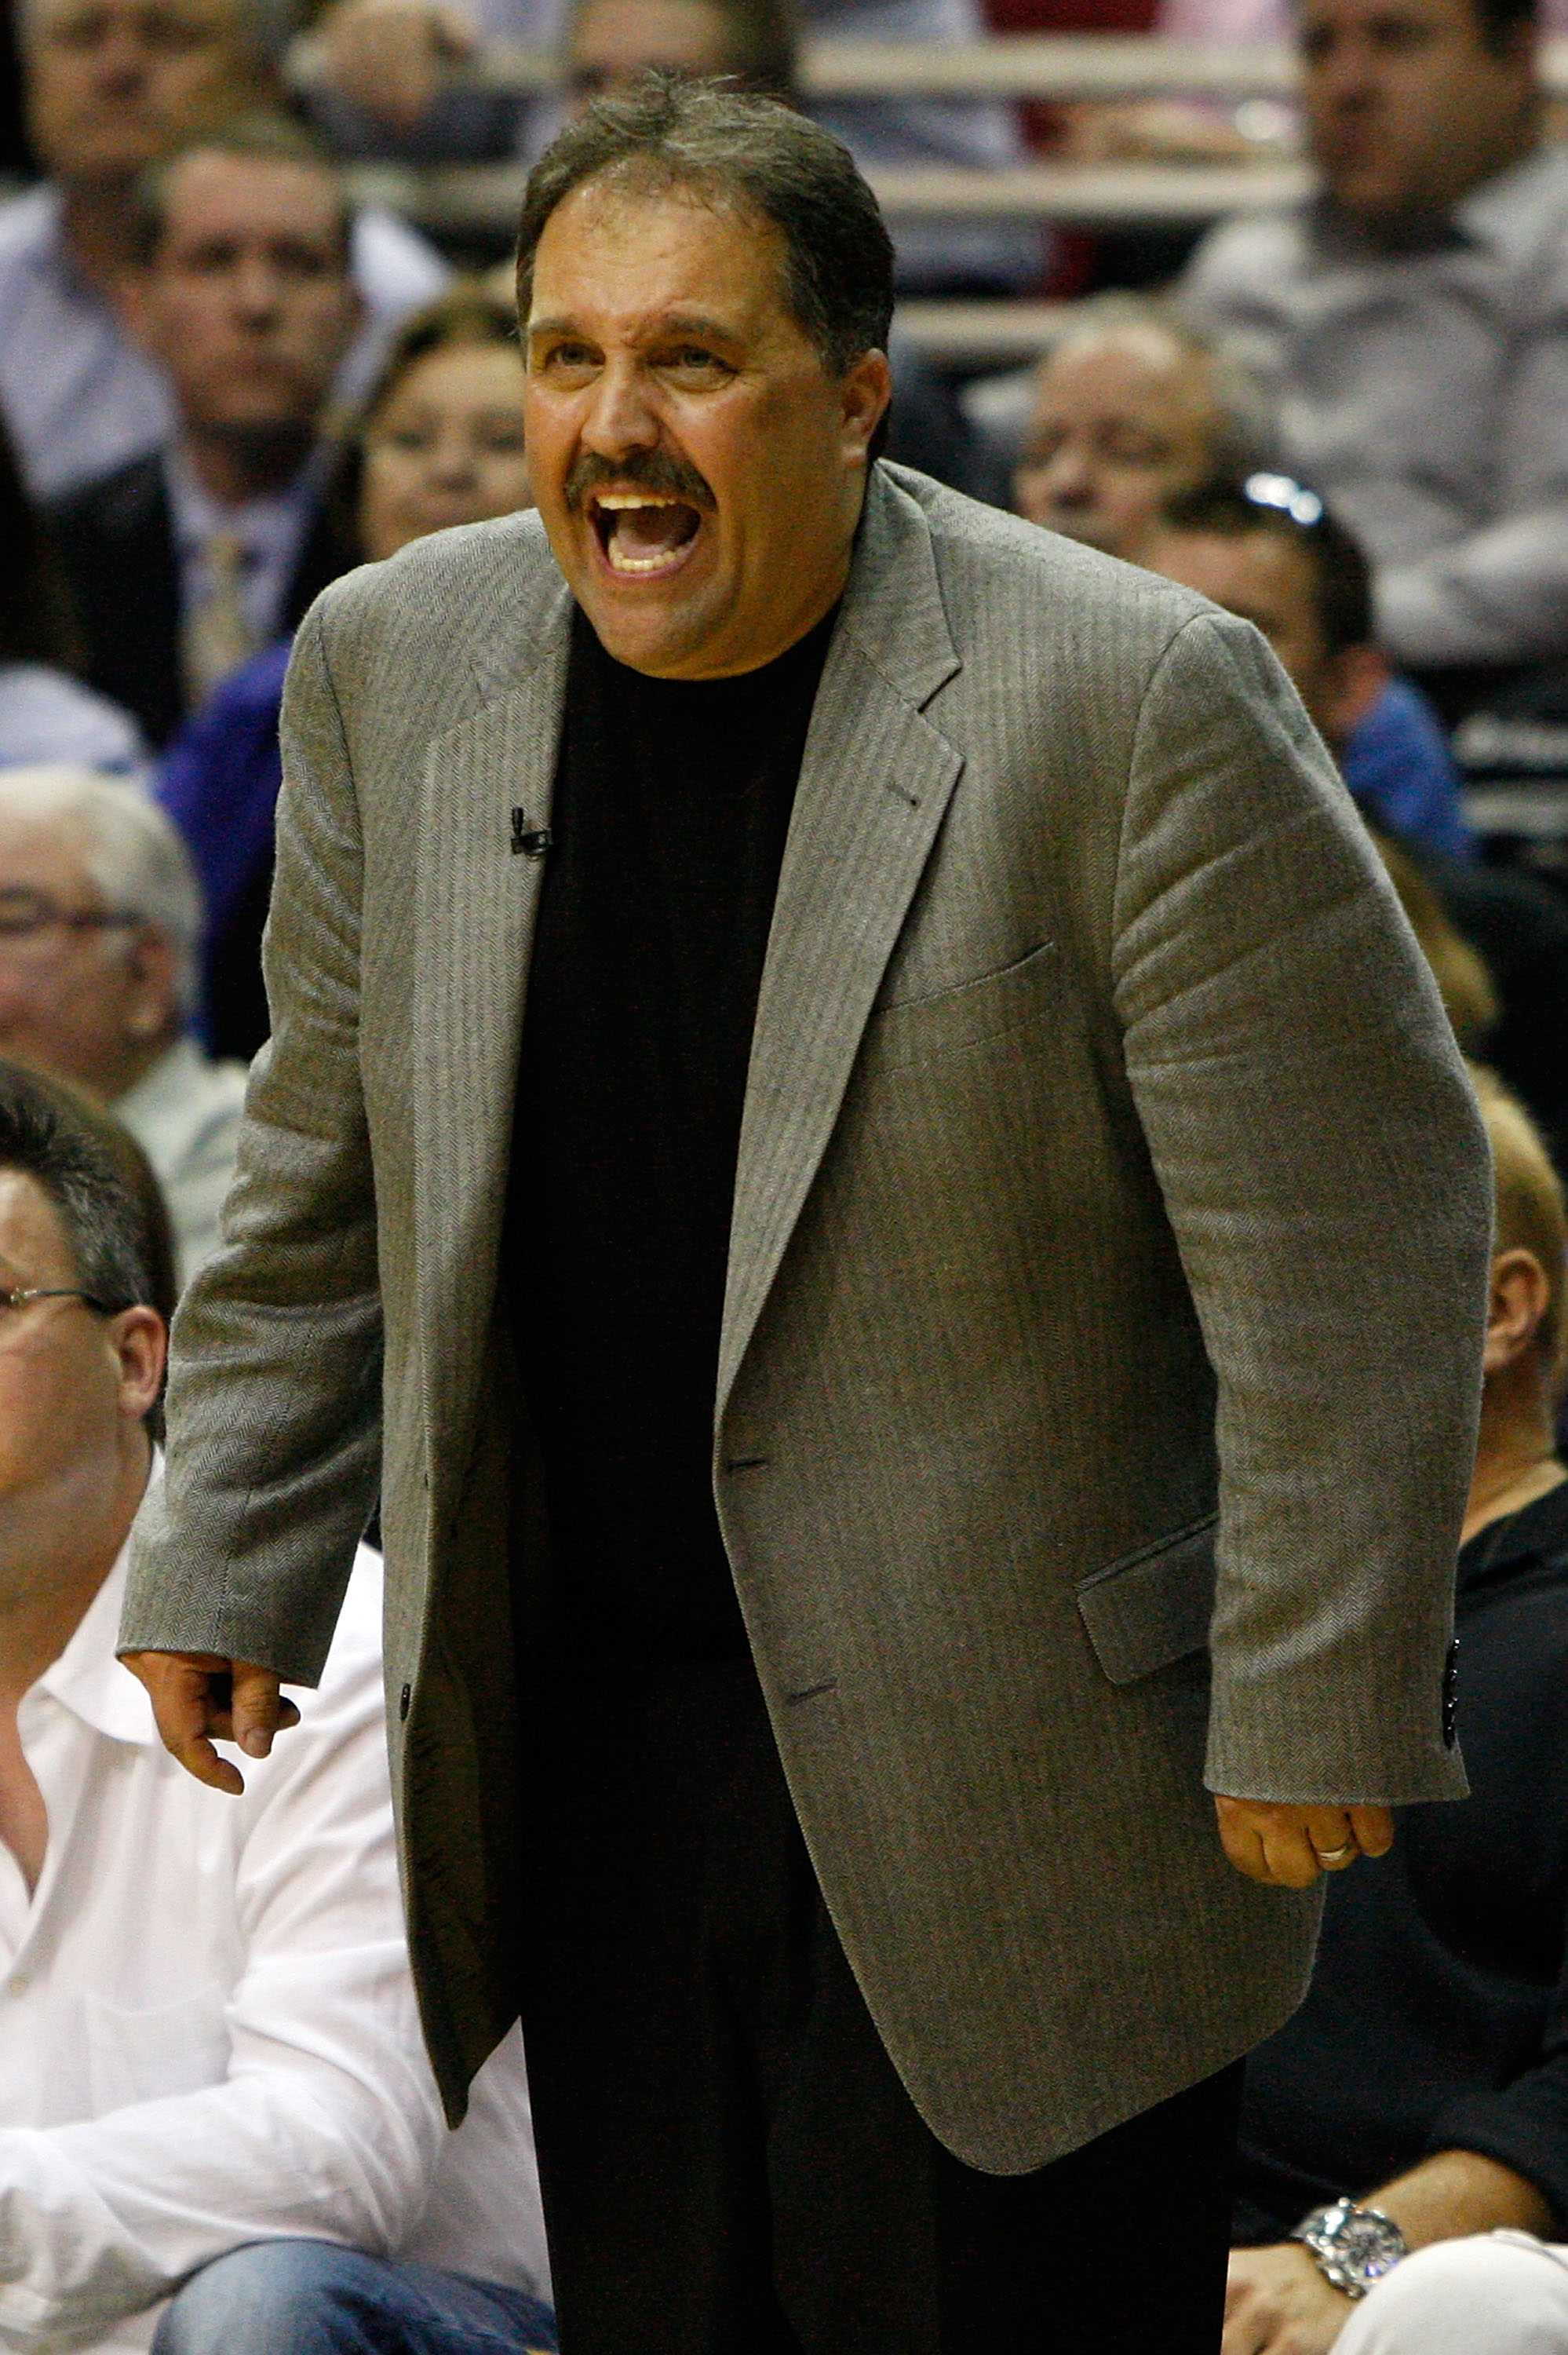 ORLANDO, FL - MAY 18:  Head coach Stan Van Gundy of the Orlando Magic reacts against the Boston Celtics in Game Two of the Eastern Conference Finals during the 2010 NBA Playoffs at Amway Arena on May 18, 2010 in Orlando, Florida.  NOTE TO USER: User expre